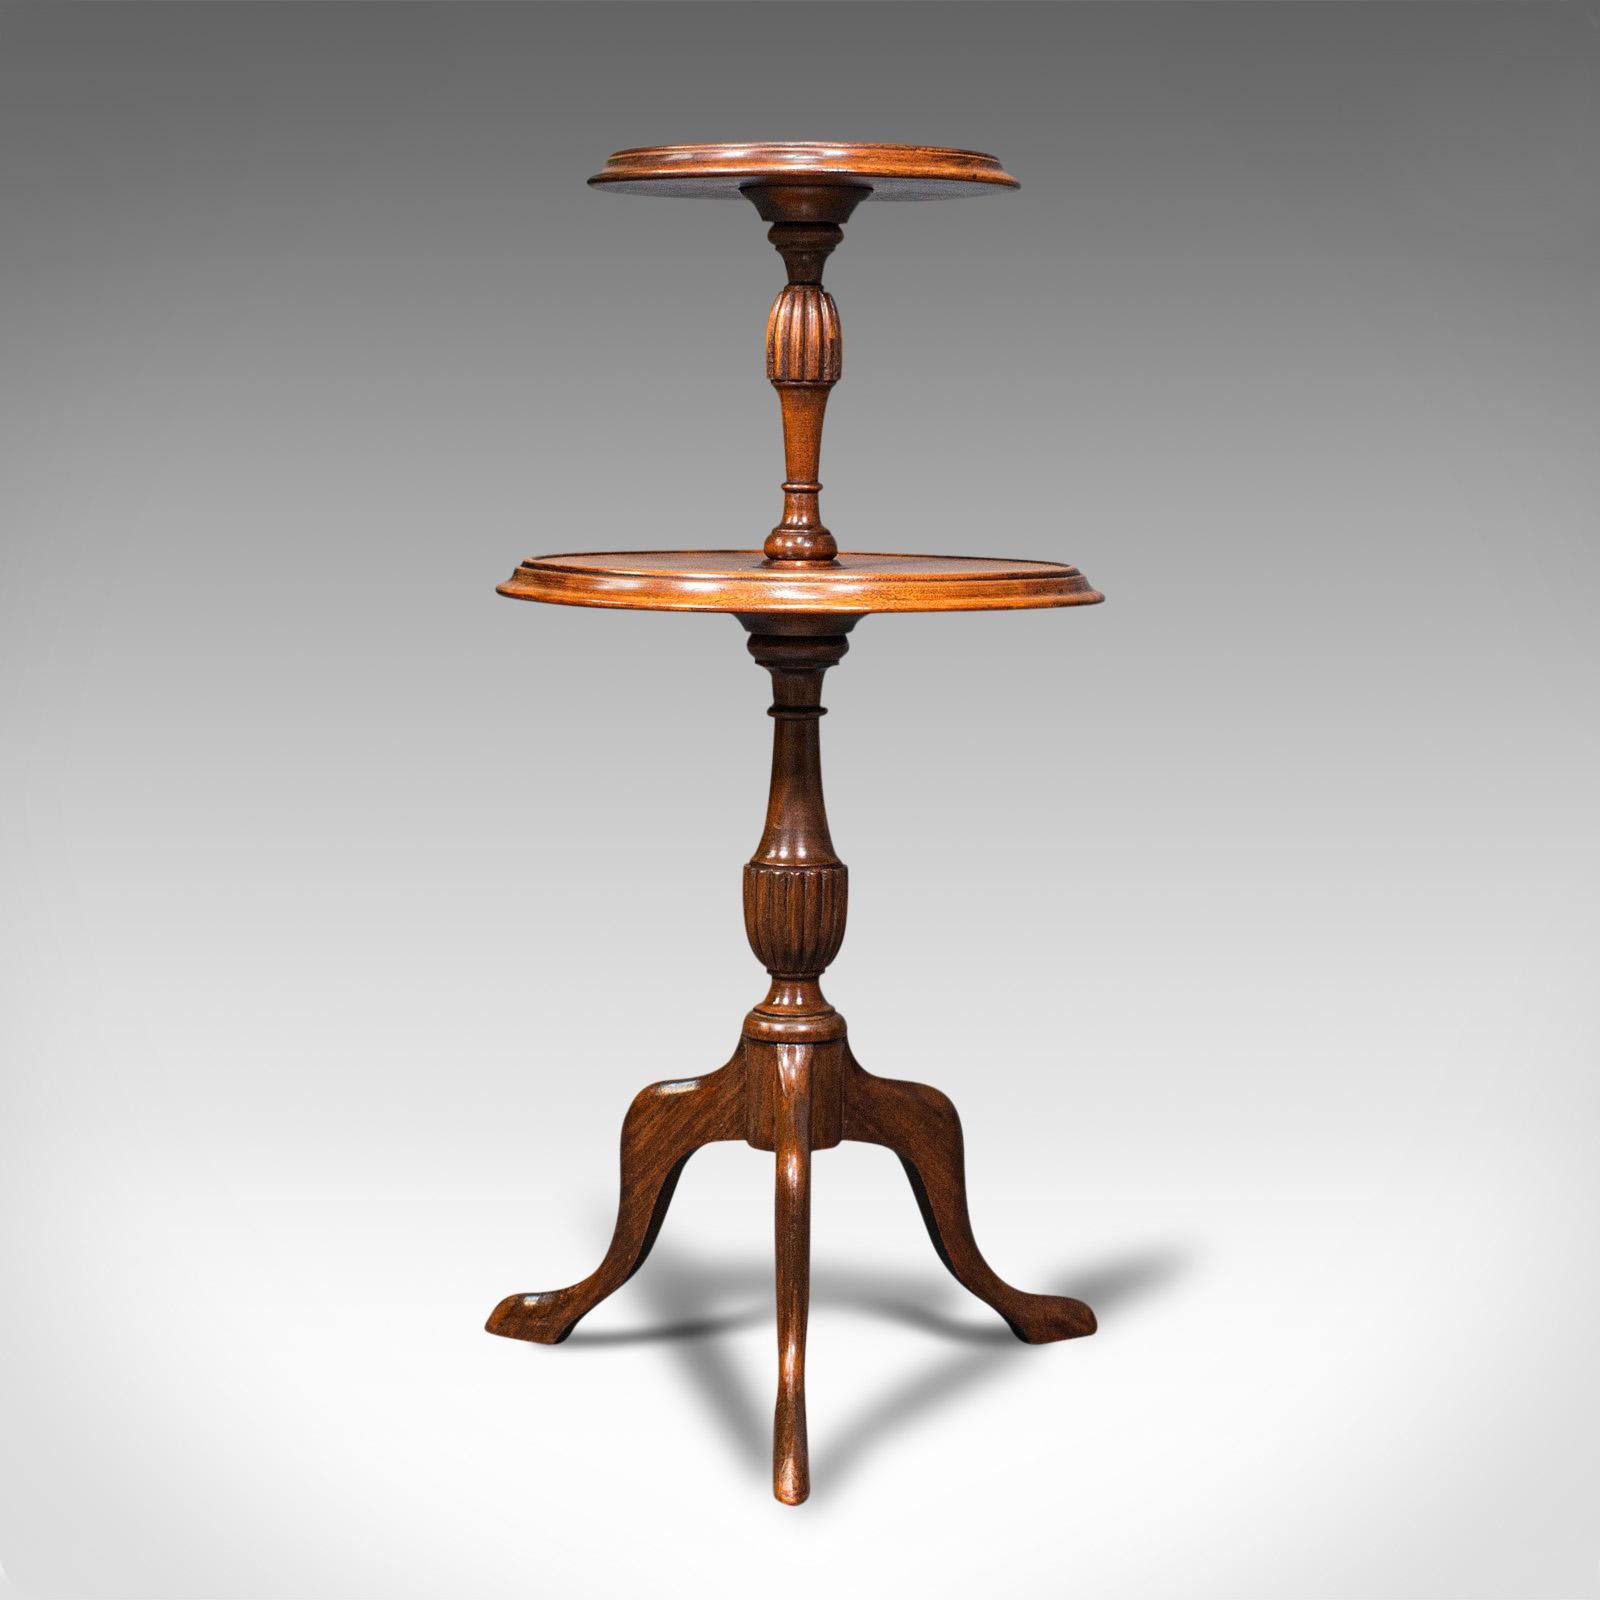 British Antique Two Tier Table, English, Mahogany, Afternoon Tea, Cake Stand, Edwardian